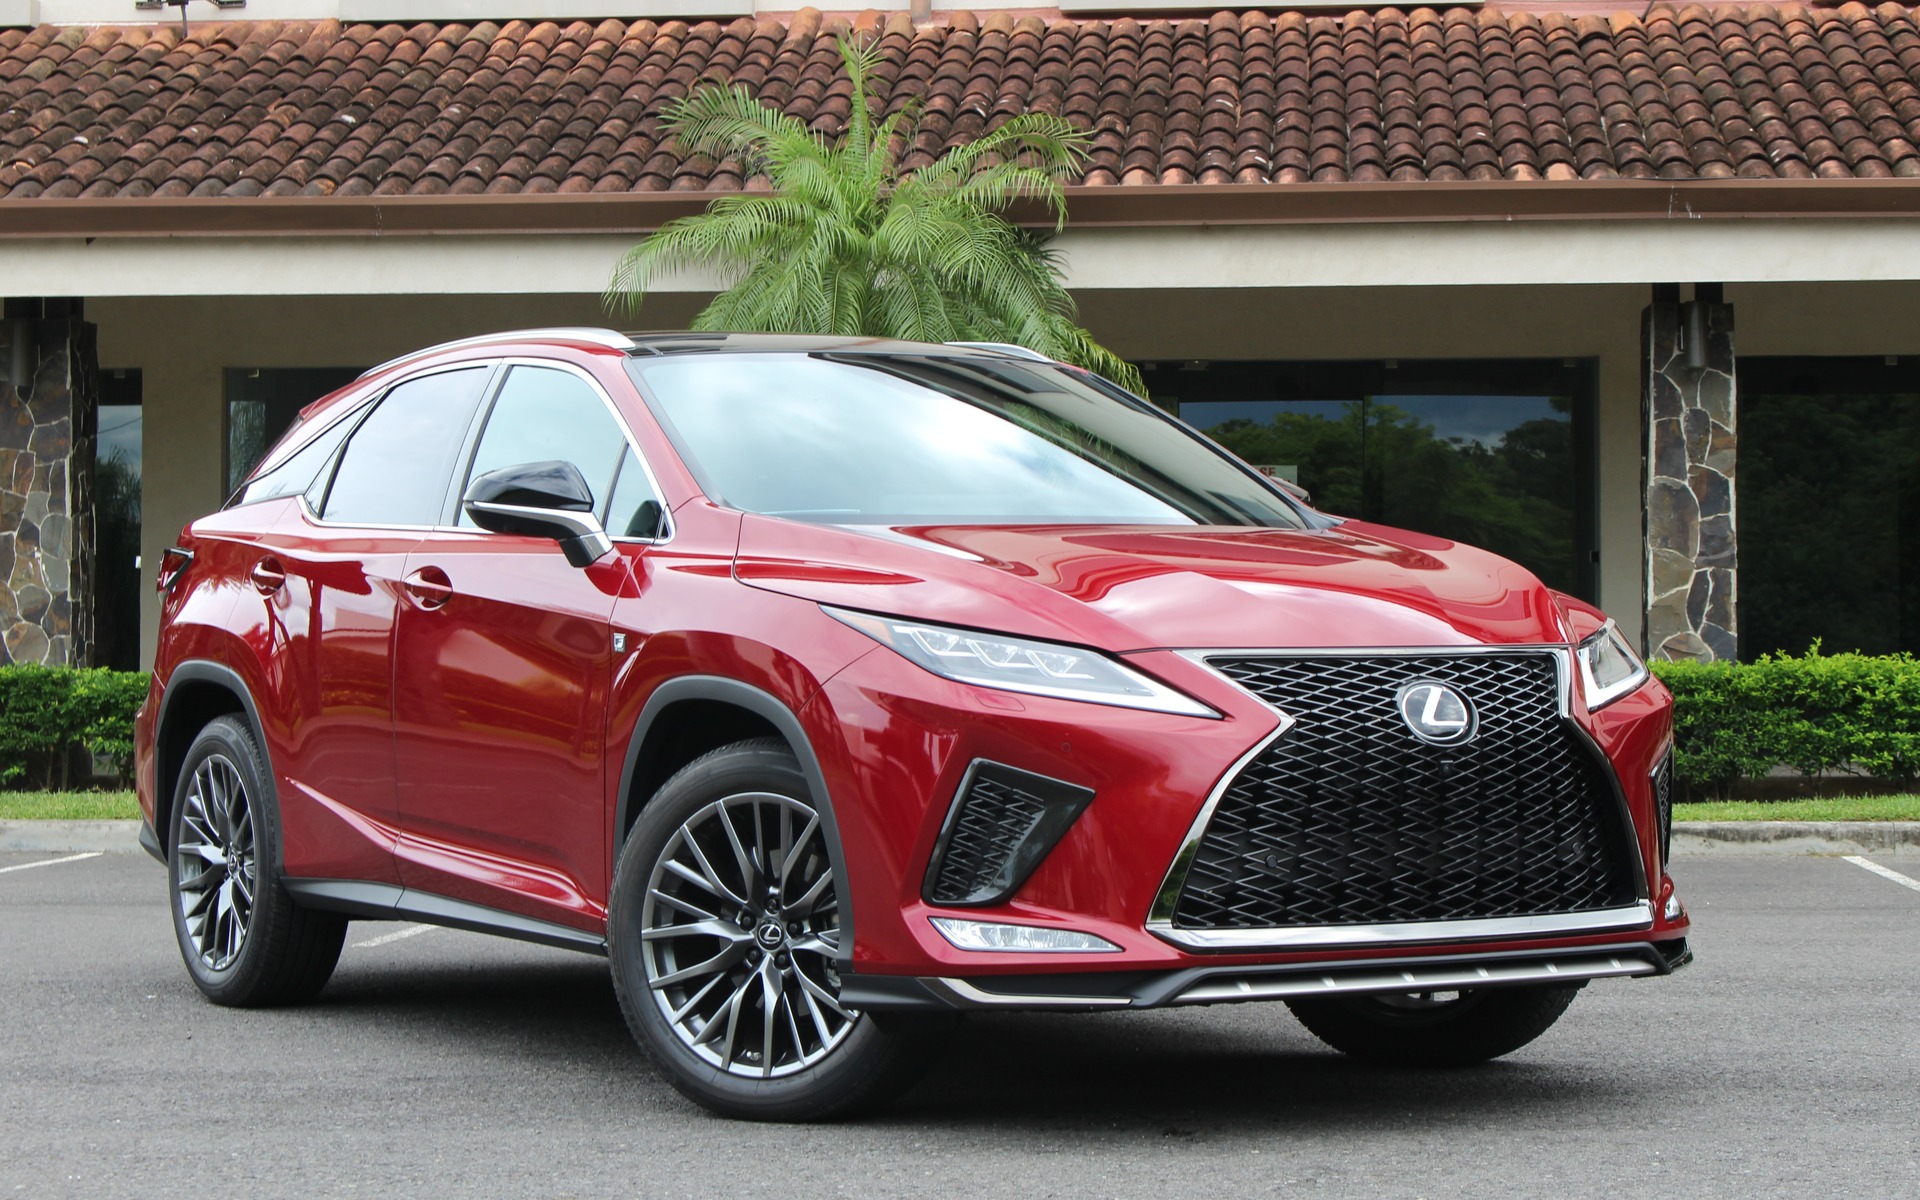 2020 Lexus Rx Minor Changes To Stay In The Game The Car Guide